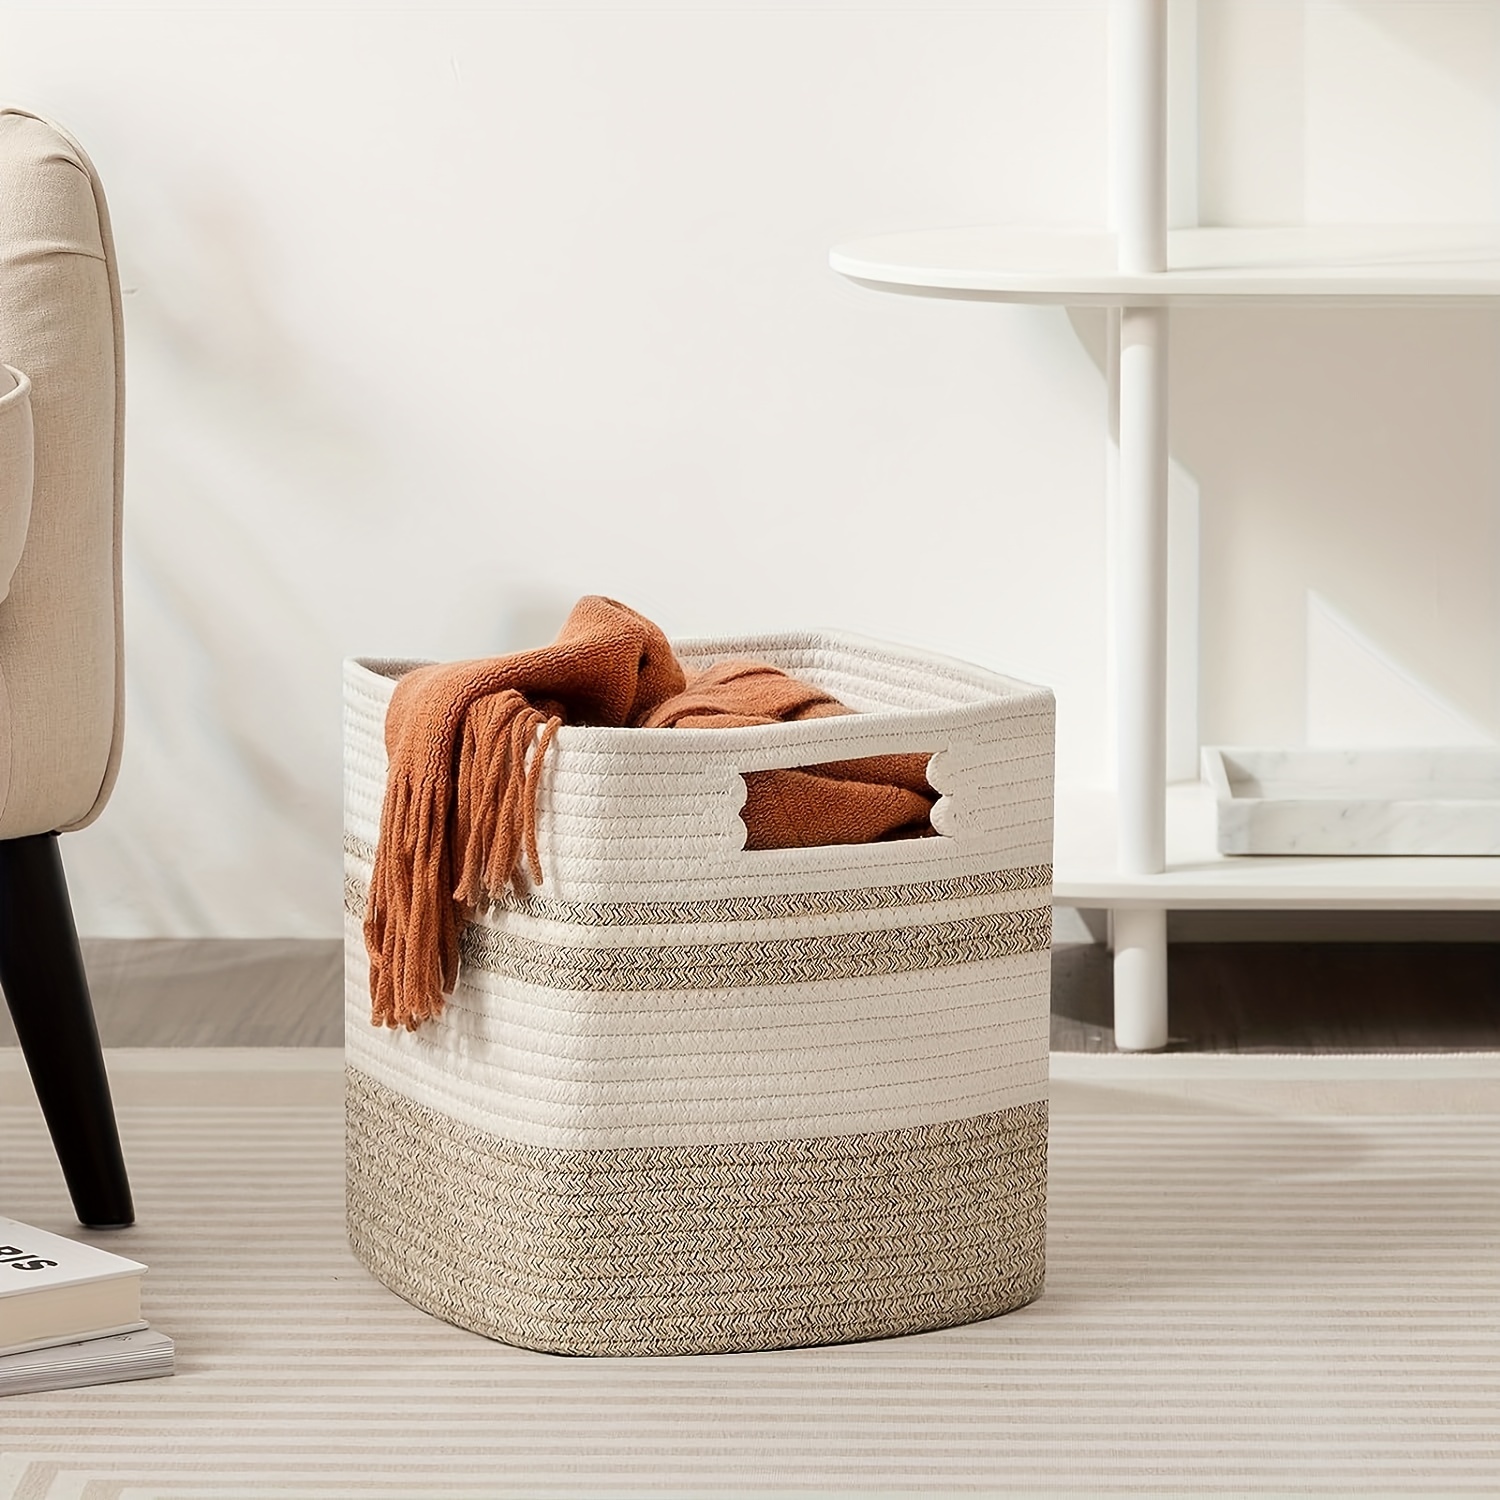 Bins & Baskets for Home Organizing